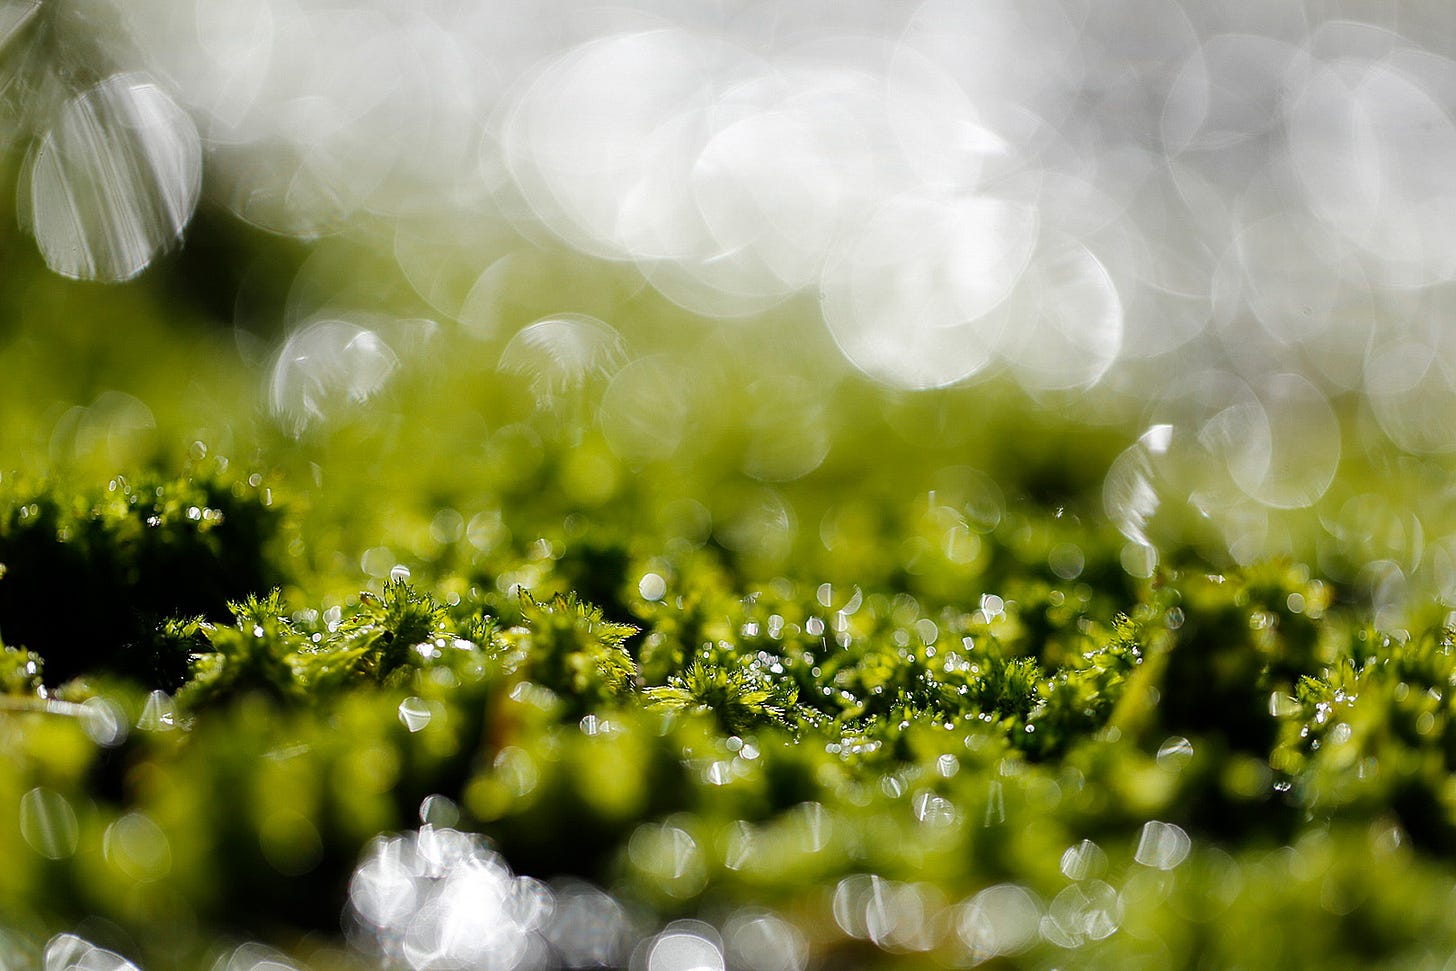 The warp and weft of a green sphagnum carpet floating in a wet flush